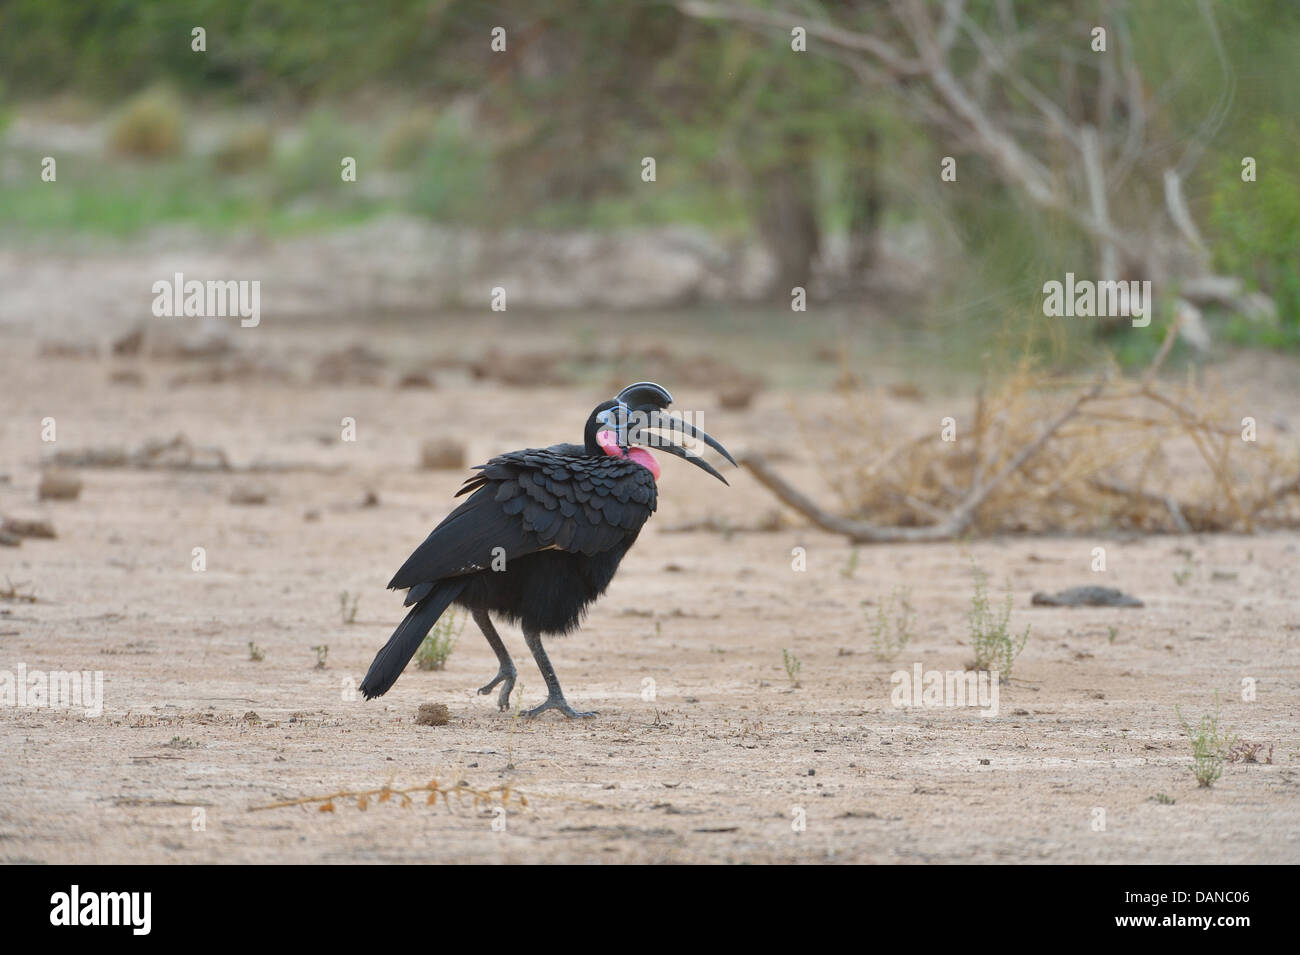 Abyssinian Ground-Hornbill - Northern Ground-Hornbill (Bucorvus abyssinicus) looking for food on the ground Stock Photo